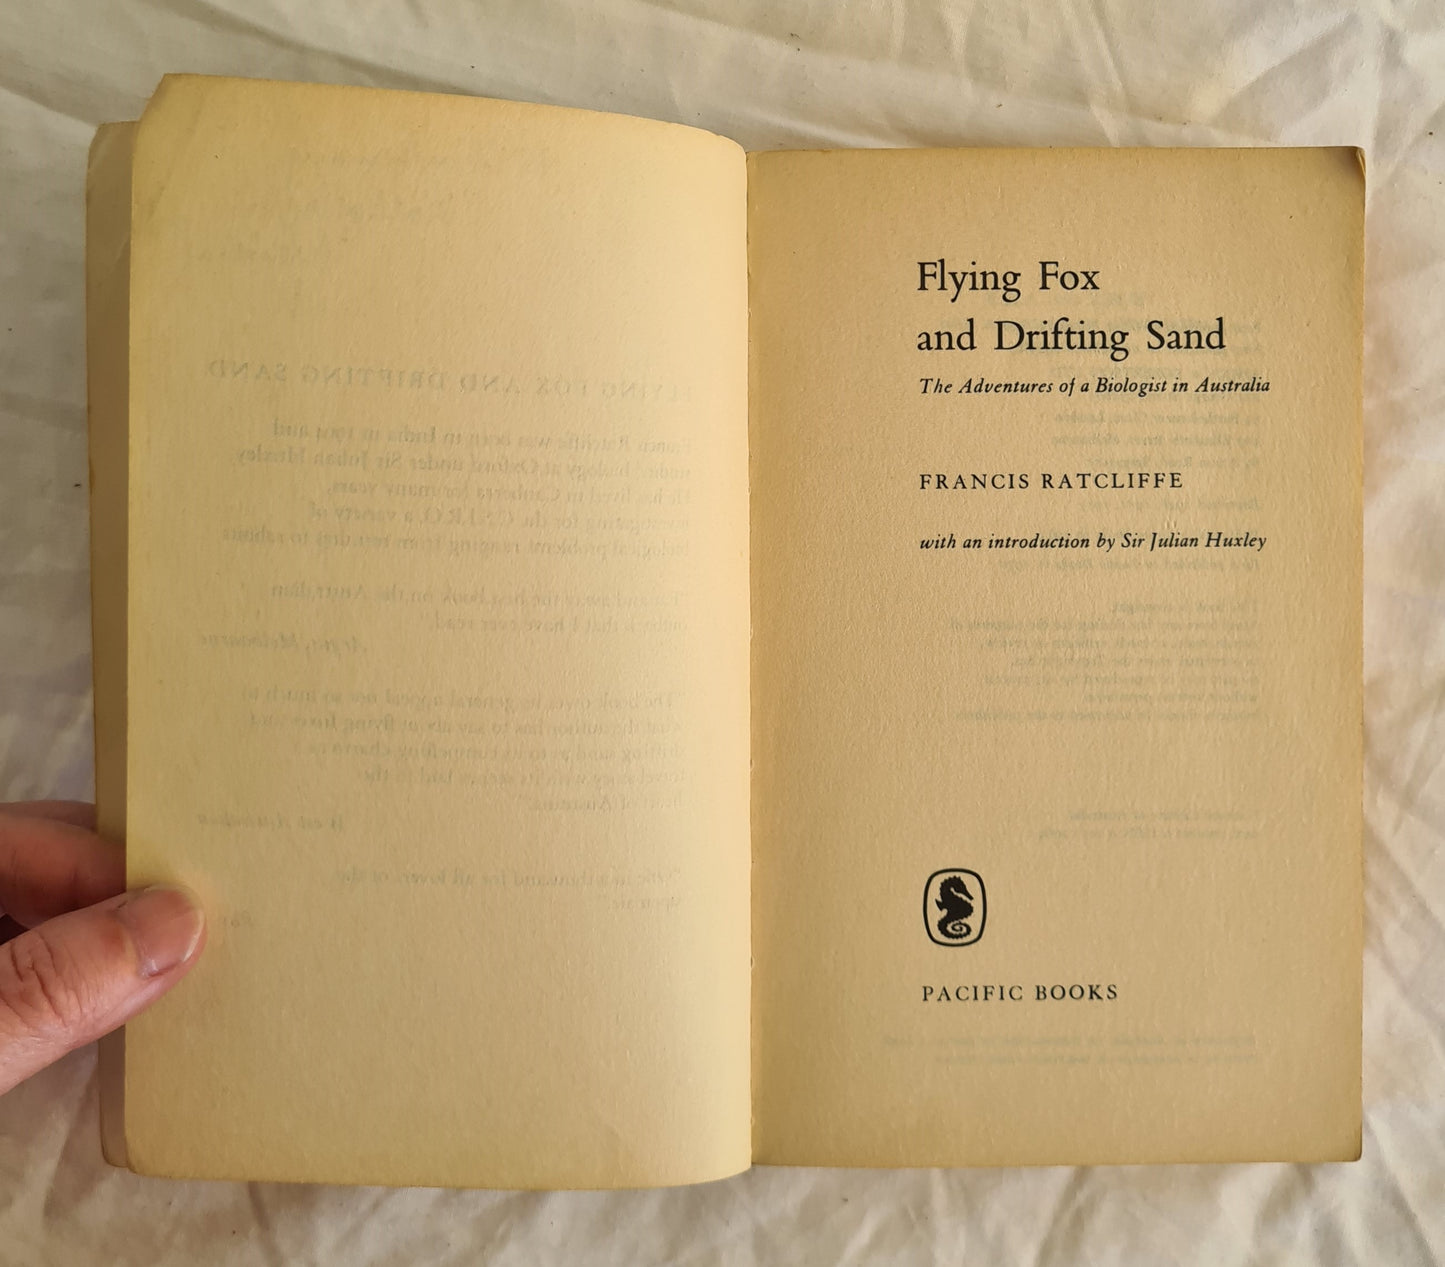 Flying Fox and Drifting Sand by Francis Ratcliffe